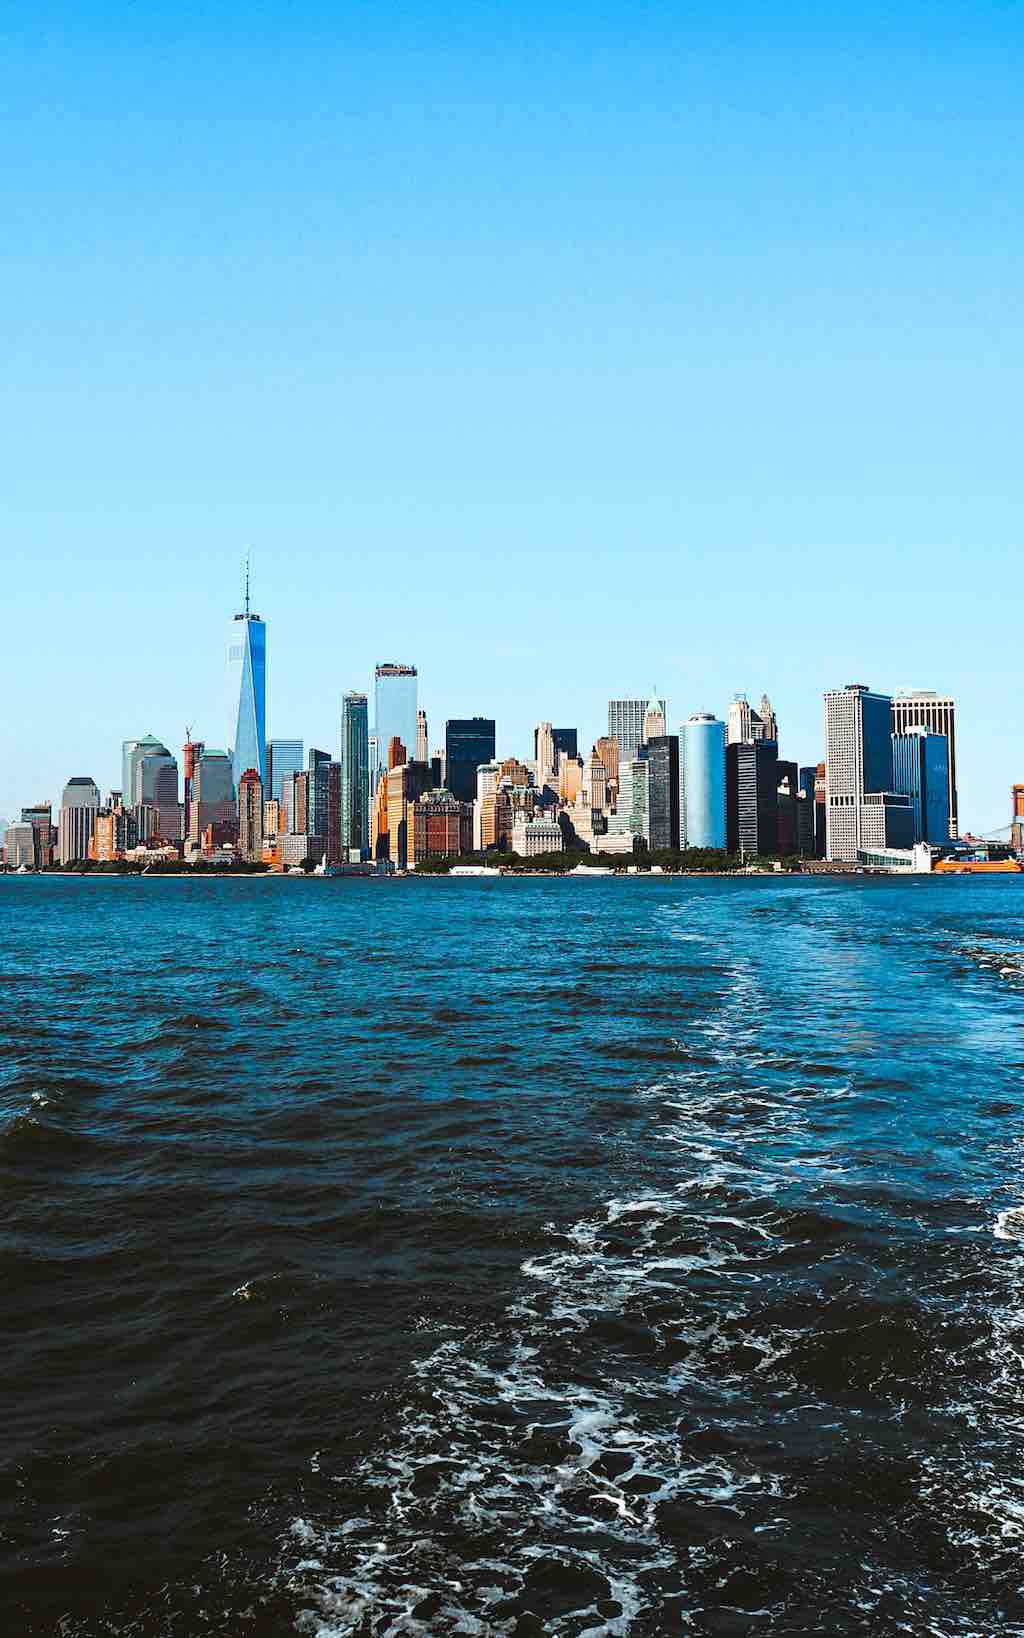 View of the New York skyline as taken from the Staten Island Ferry